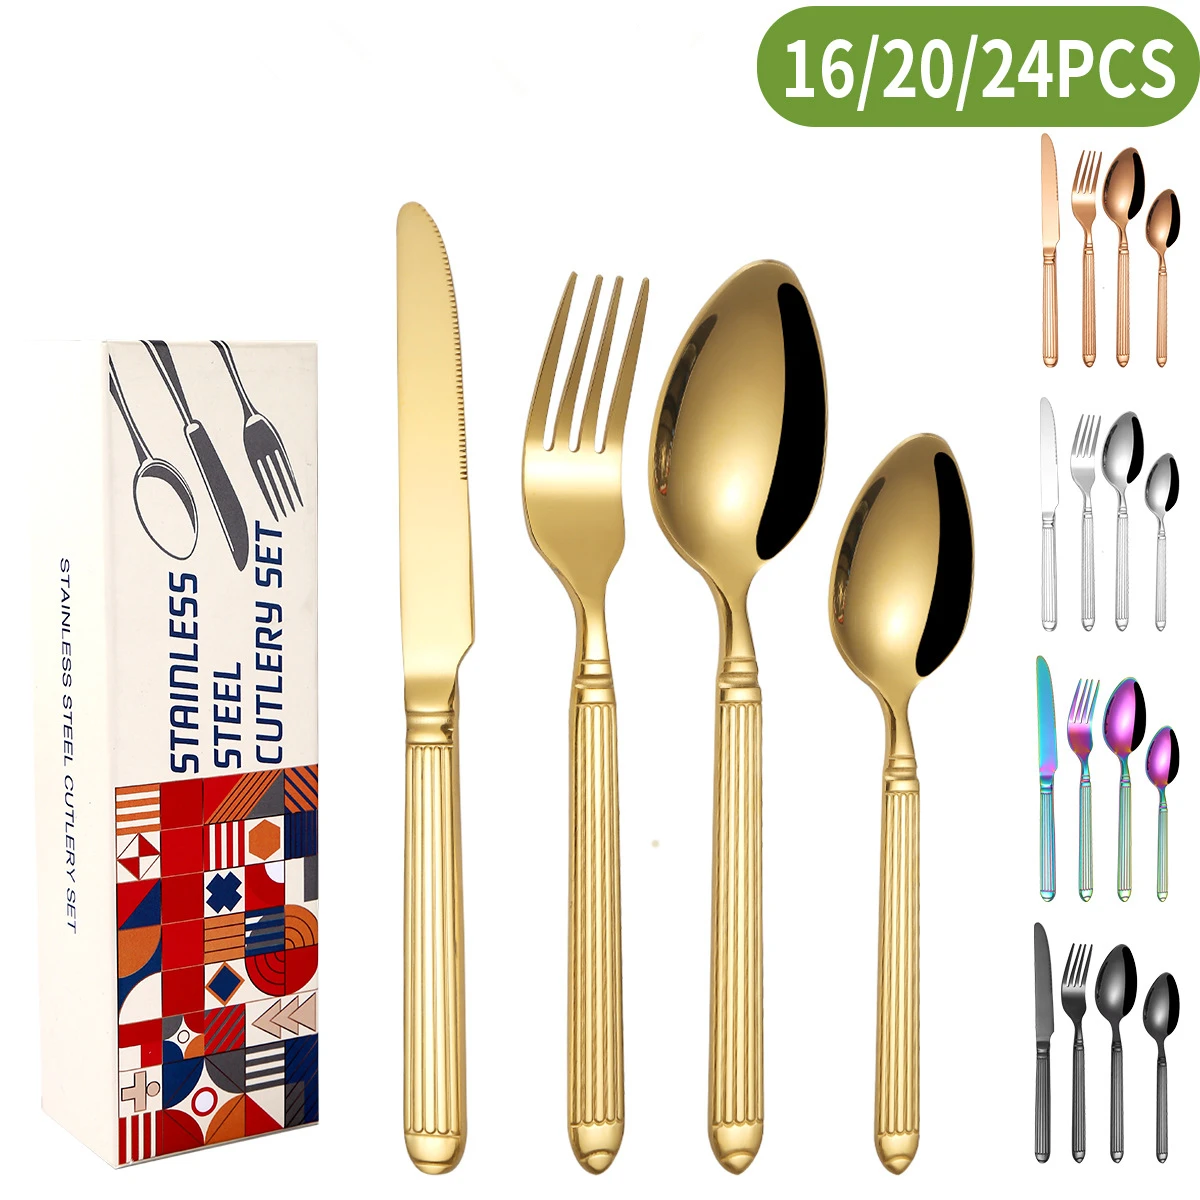 

16/20/24 Pcs Classical Golden Cutlery Set Stainless Steel Gold Flatware For 6 Silver Dinnerware Knife Spoon Fork Drop Ship